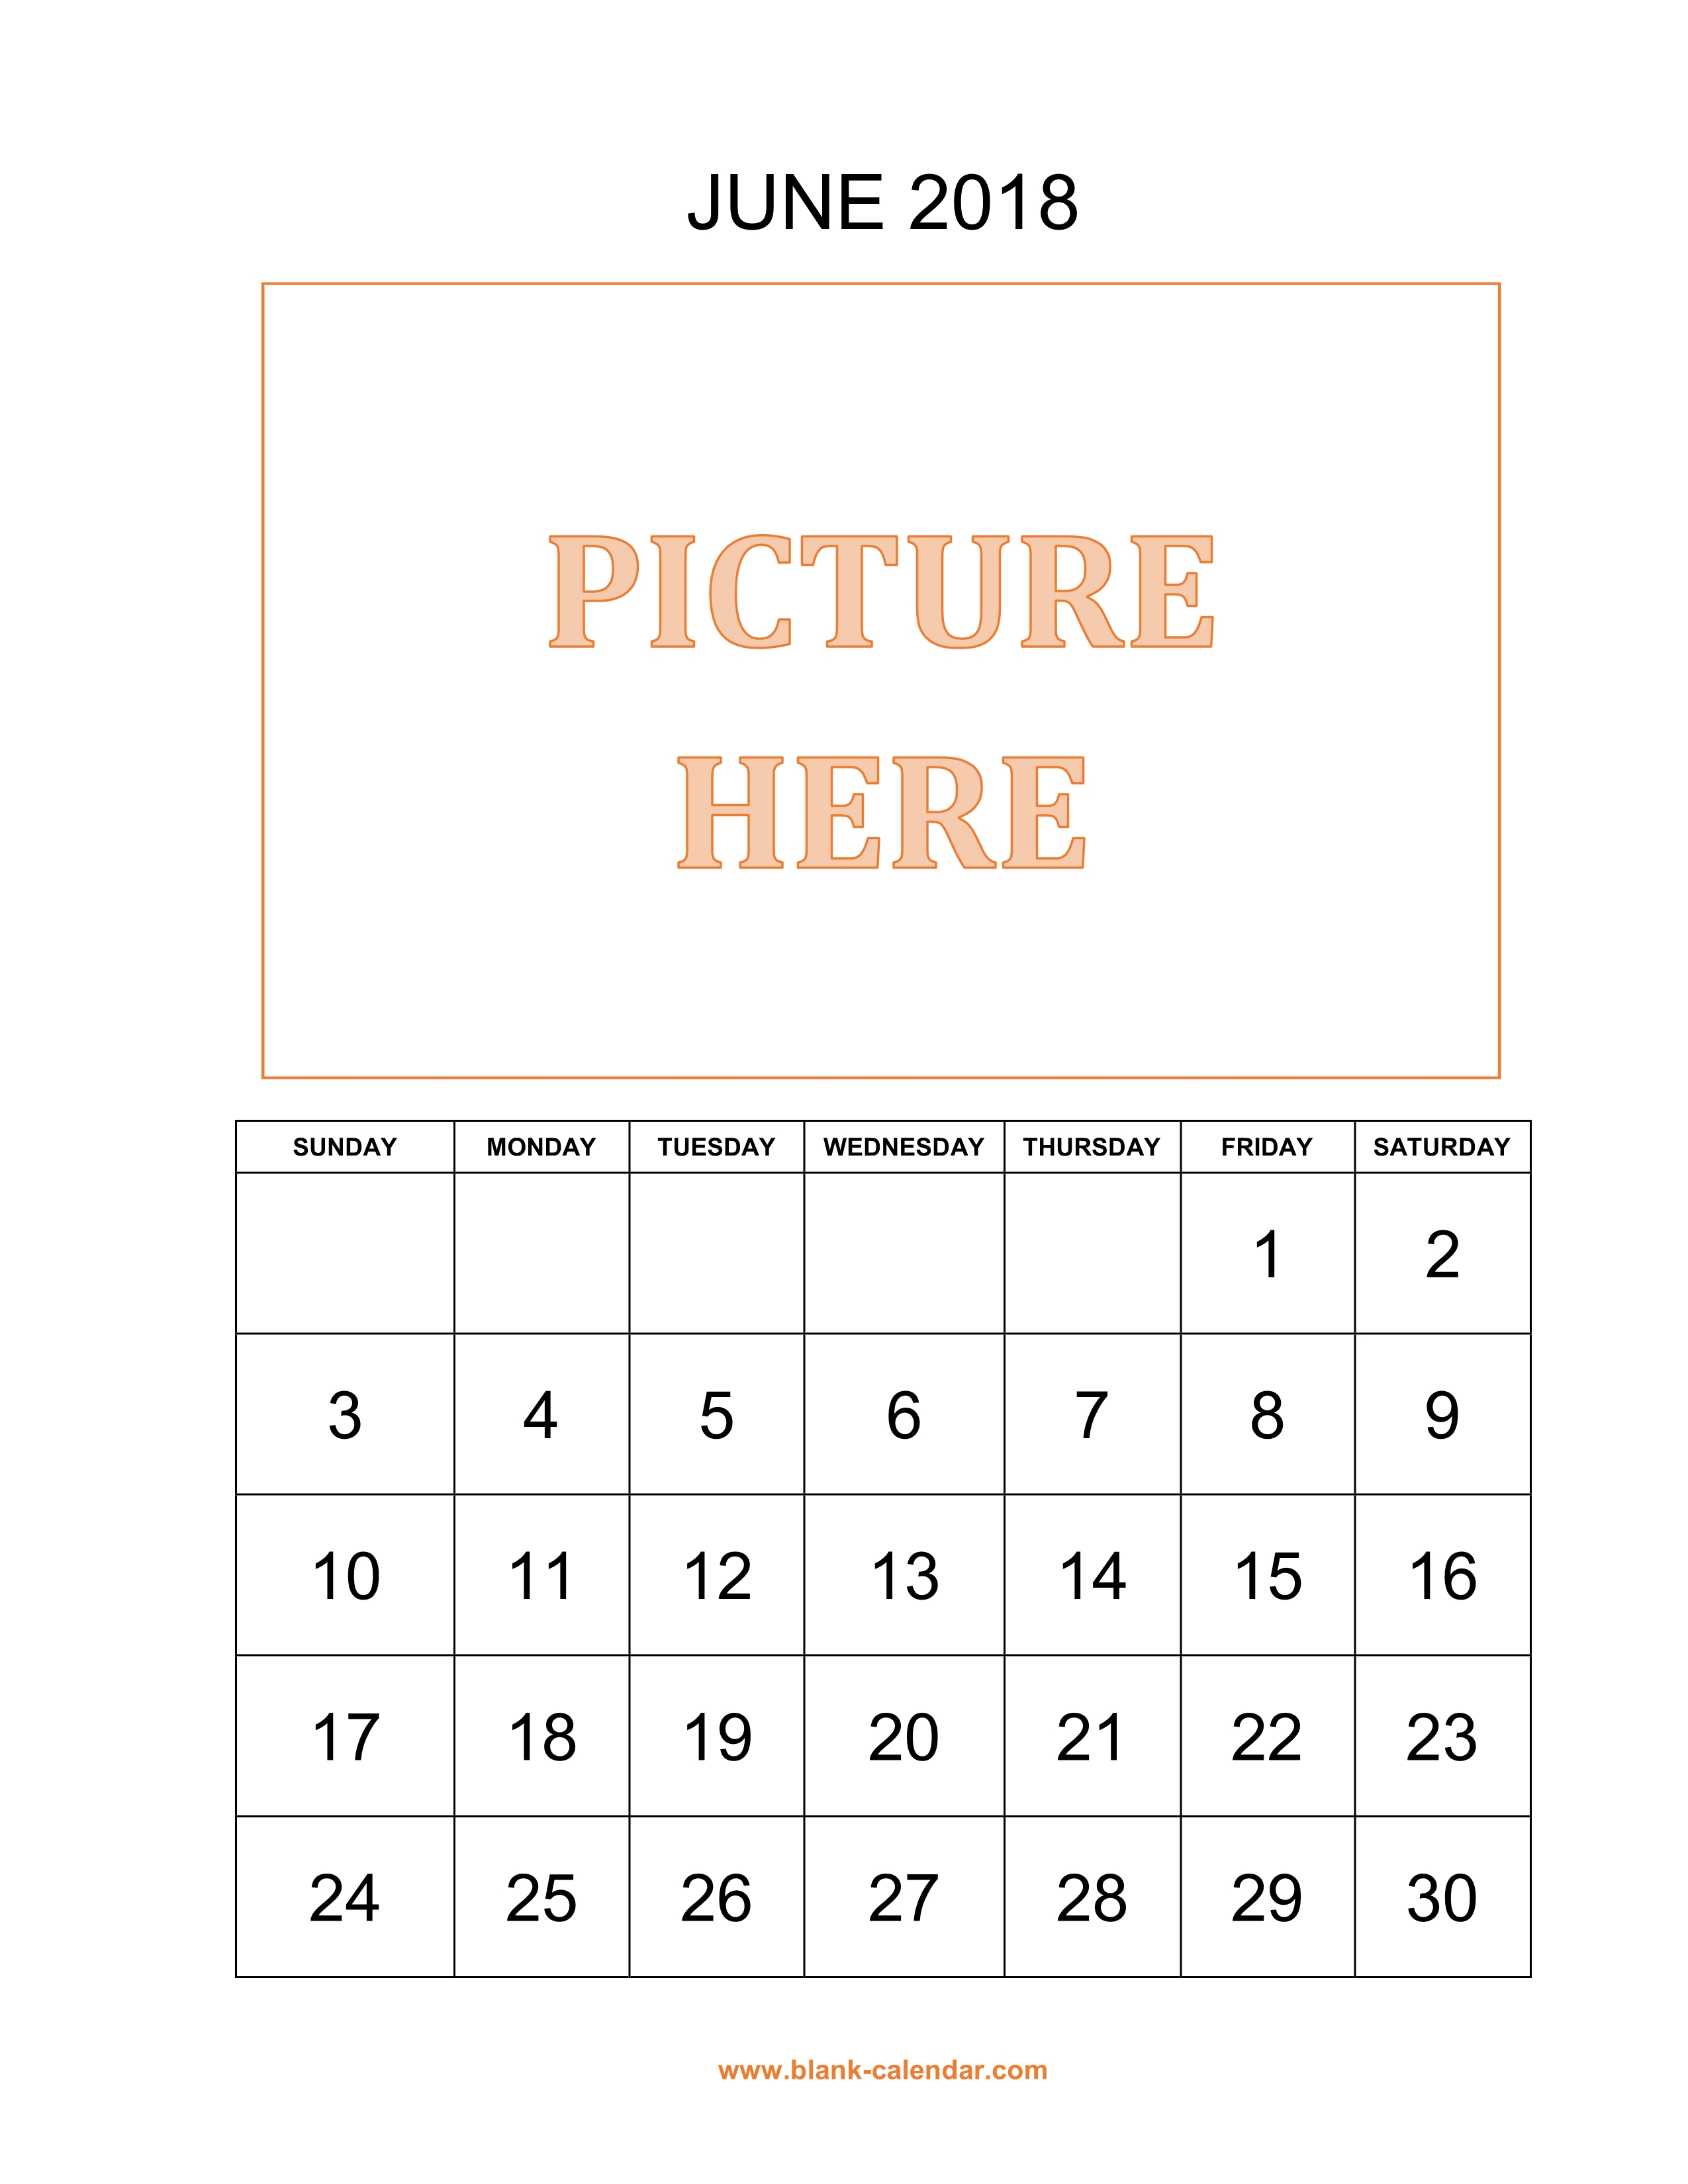 free-download-printable-june-2018-calendar-pictures-can-be-placed-at-the-top